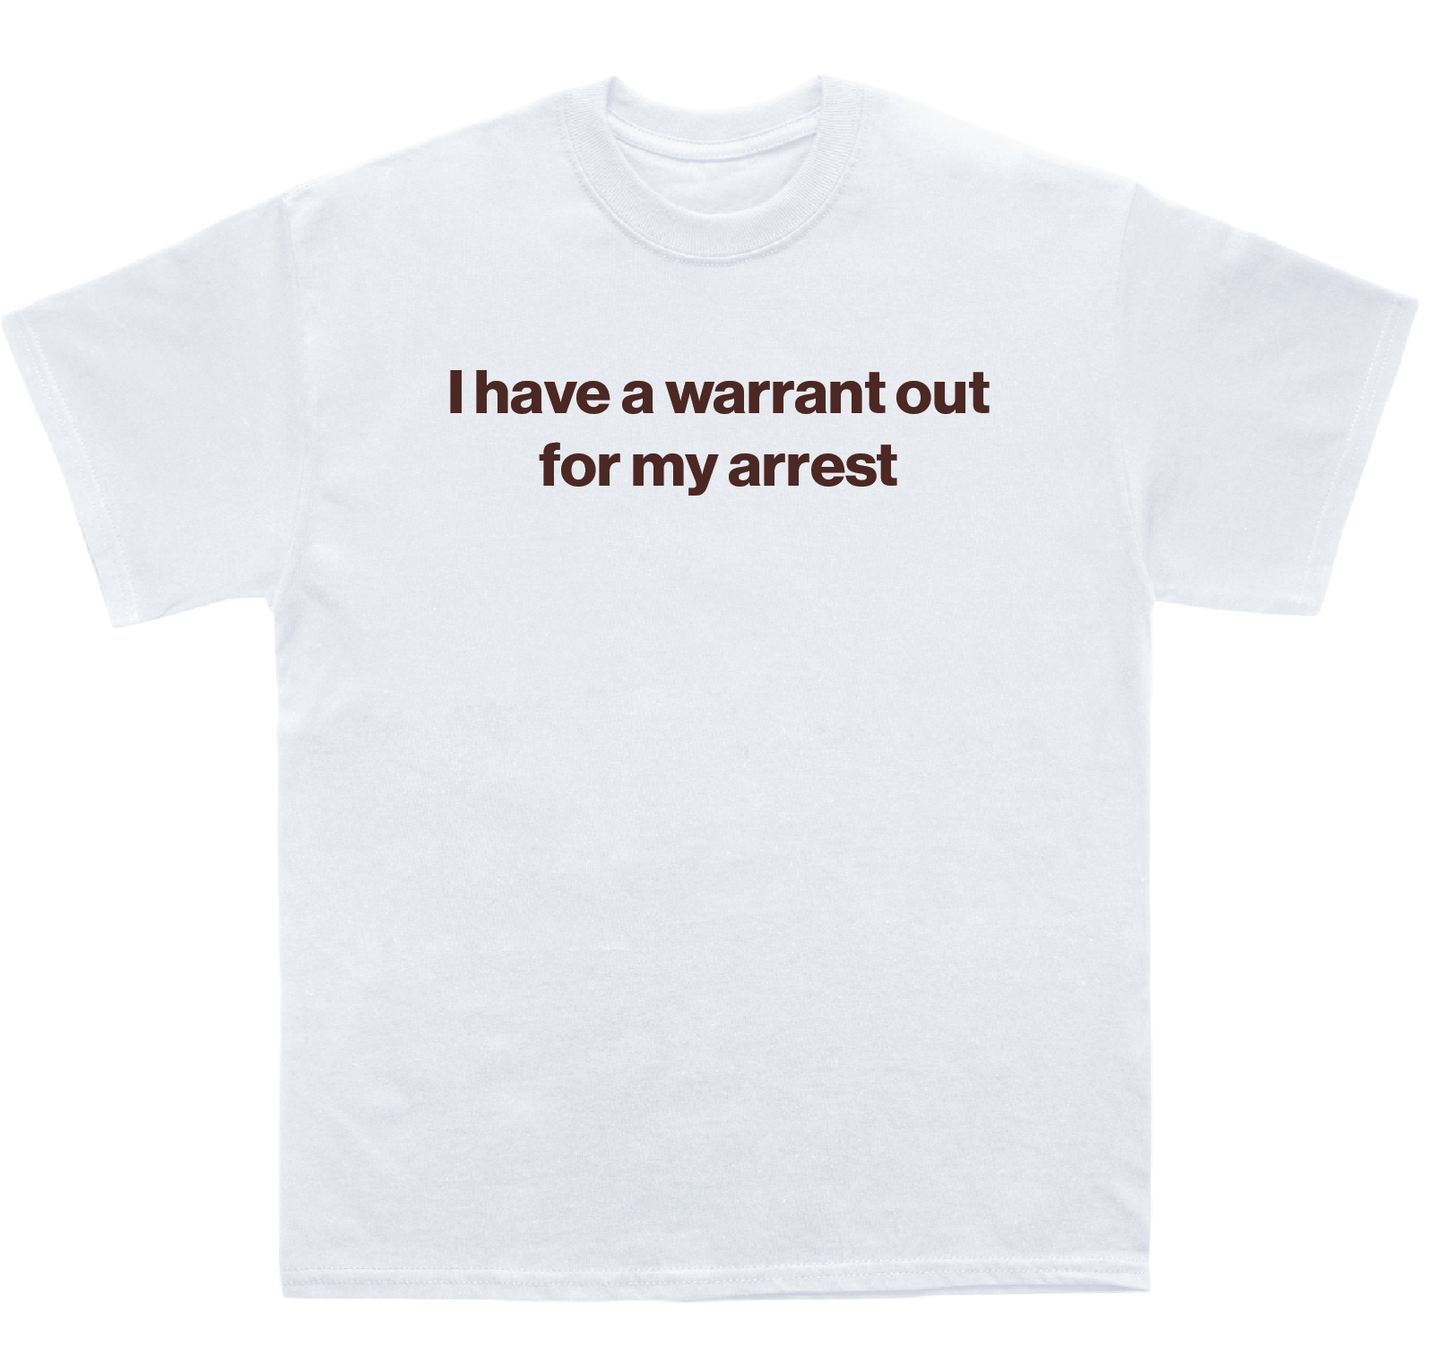 I have a warrant out for my arrest shirt